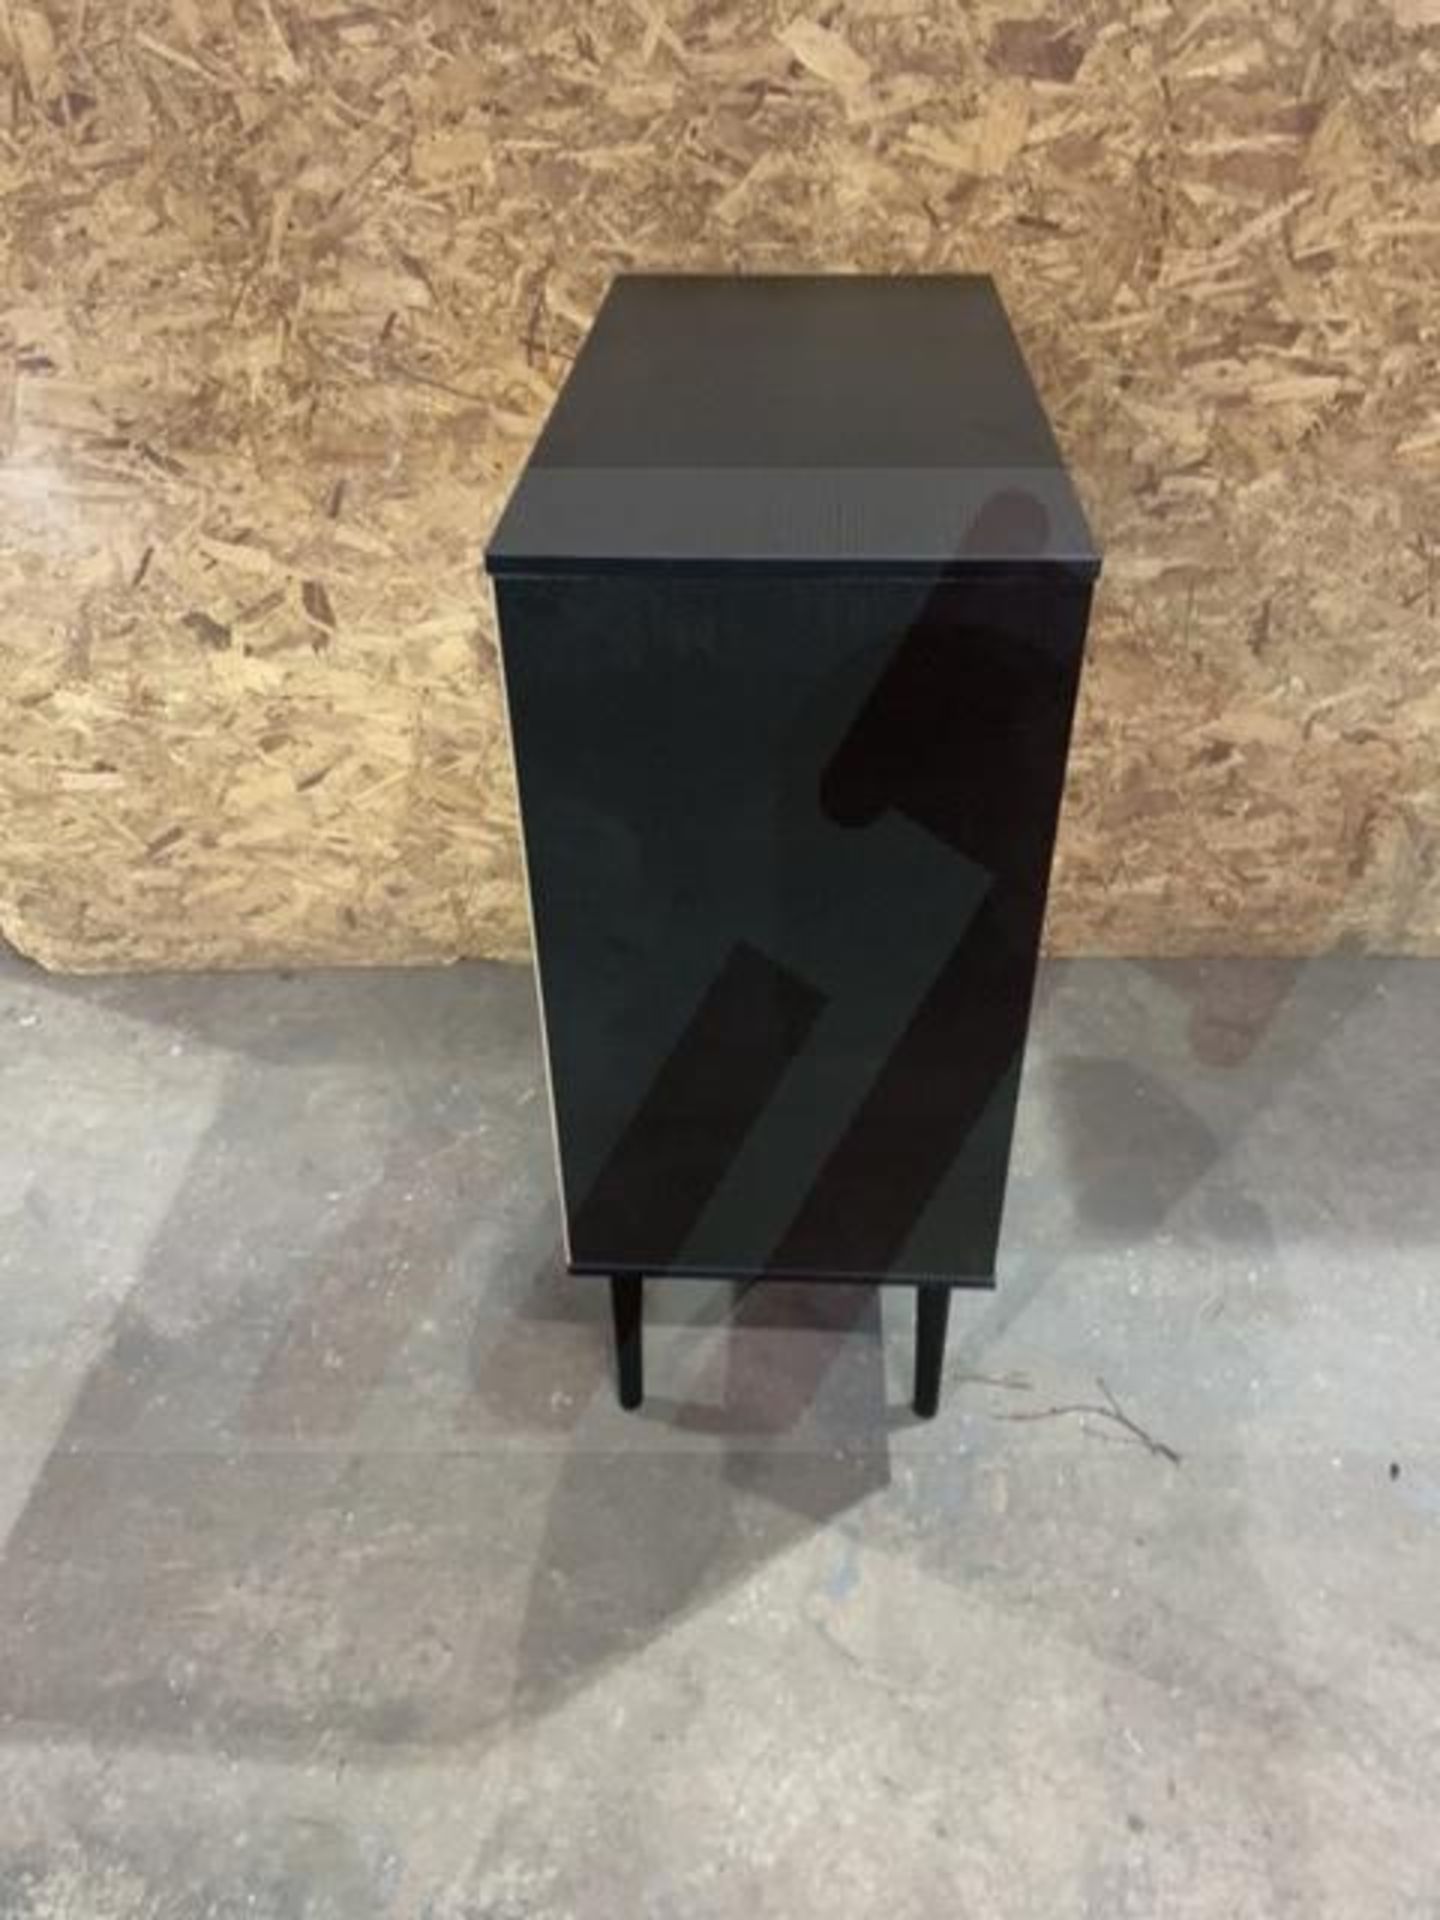 4 Drawer Chest of Drawers | Black Wood Effect | On Legs 67x40x91cm - Image 3 of 3